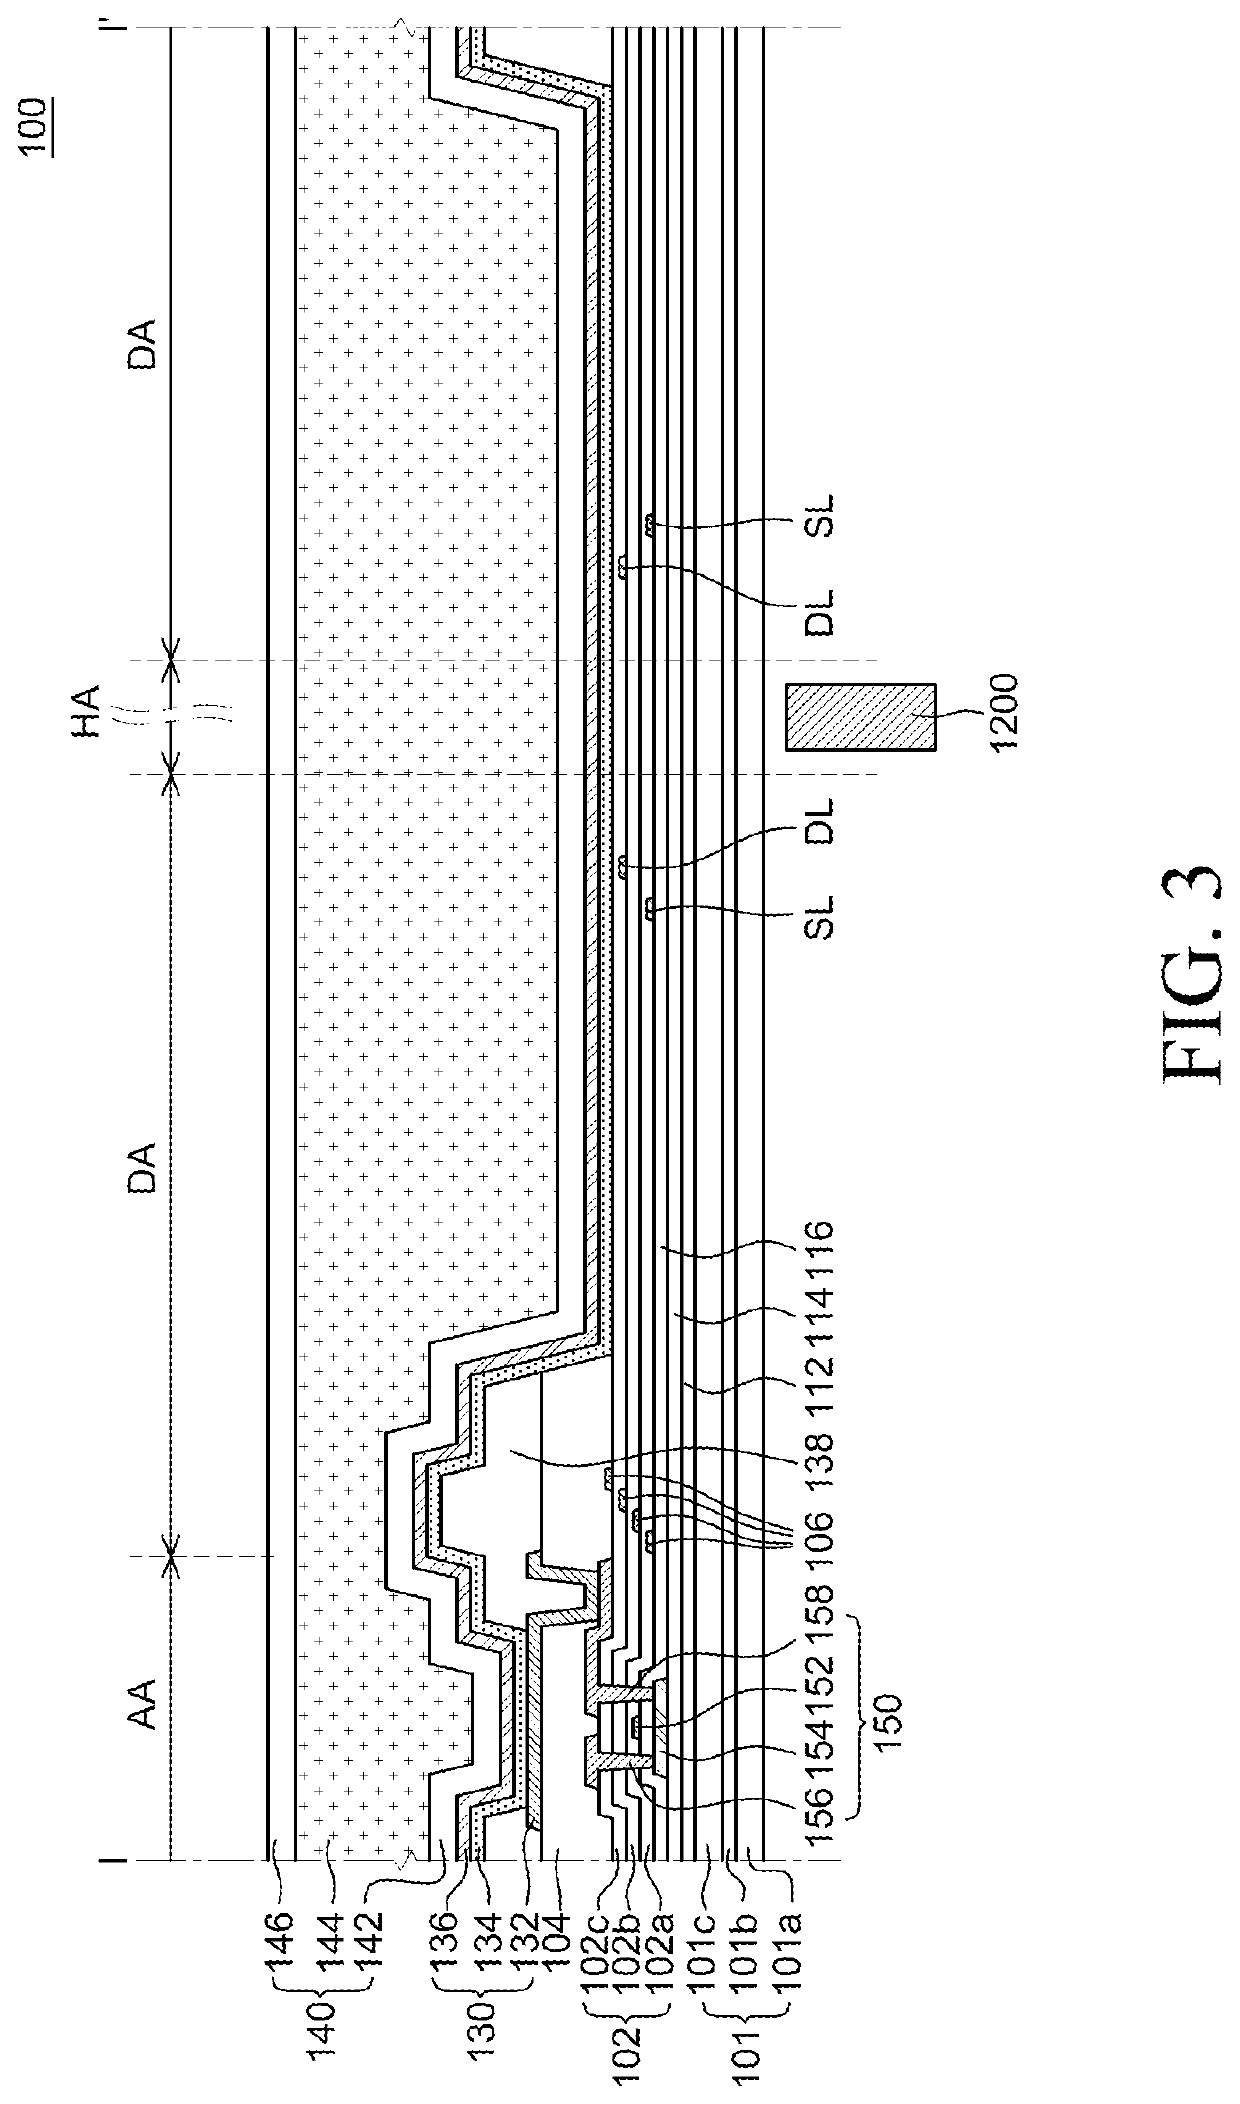 Display device including see-through area for camera